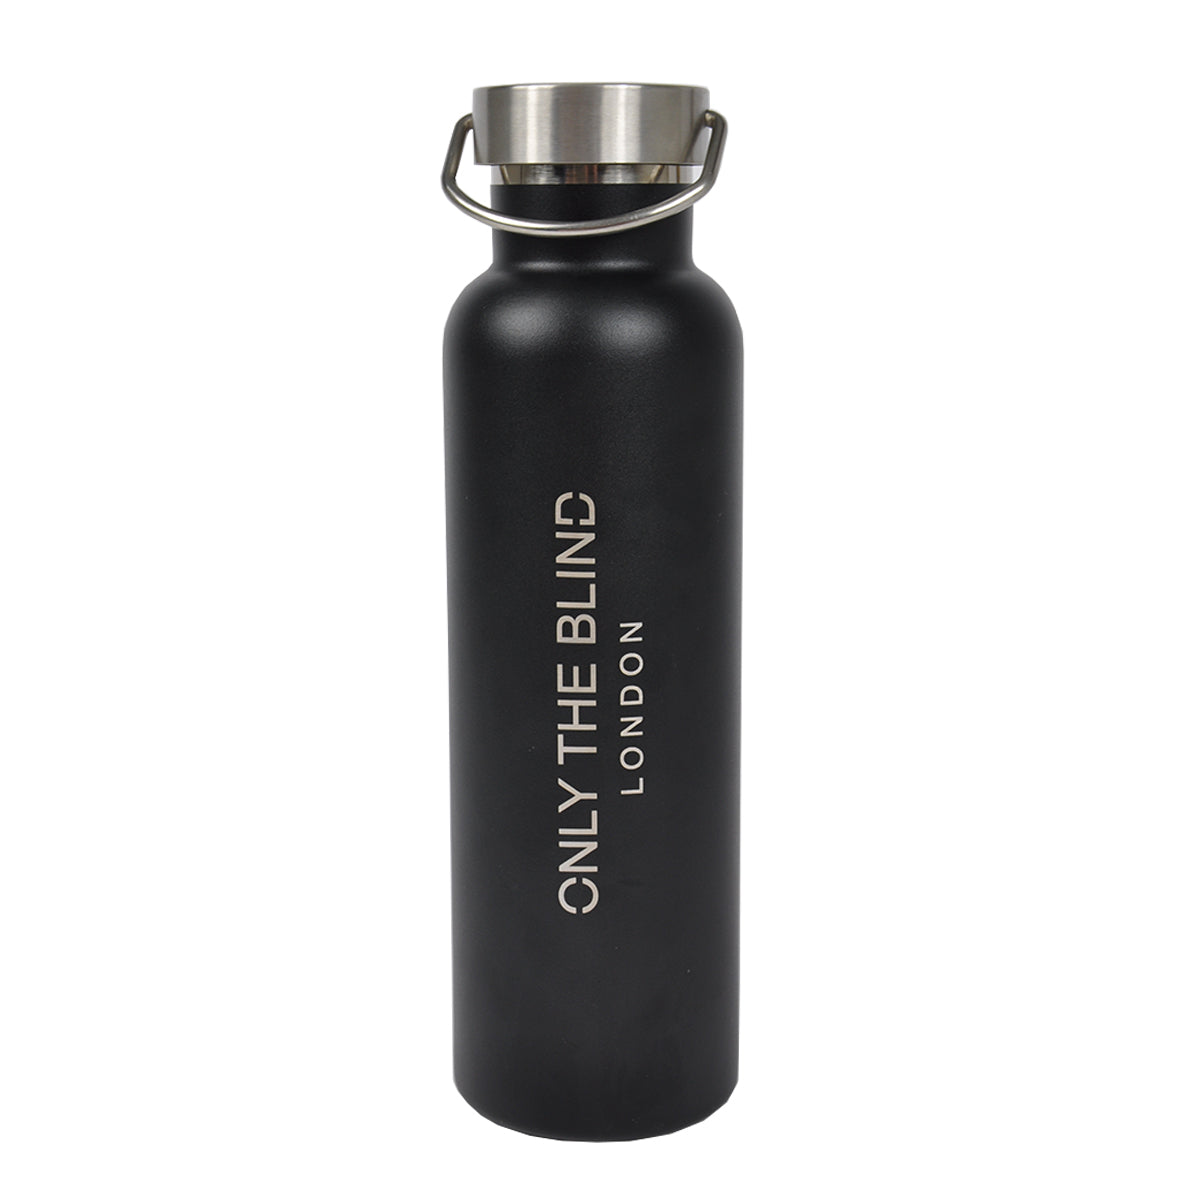 Signature Stainless Steel Flask